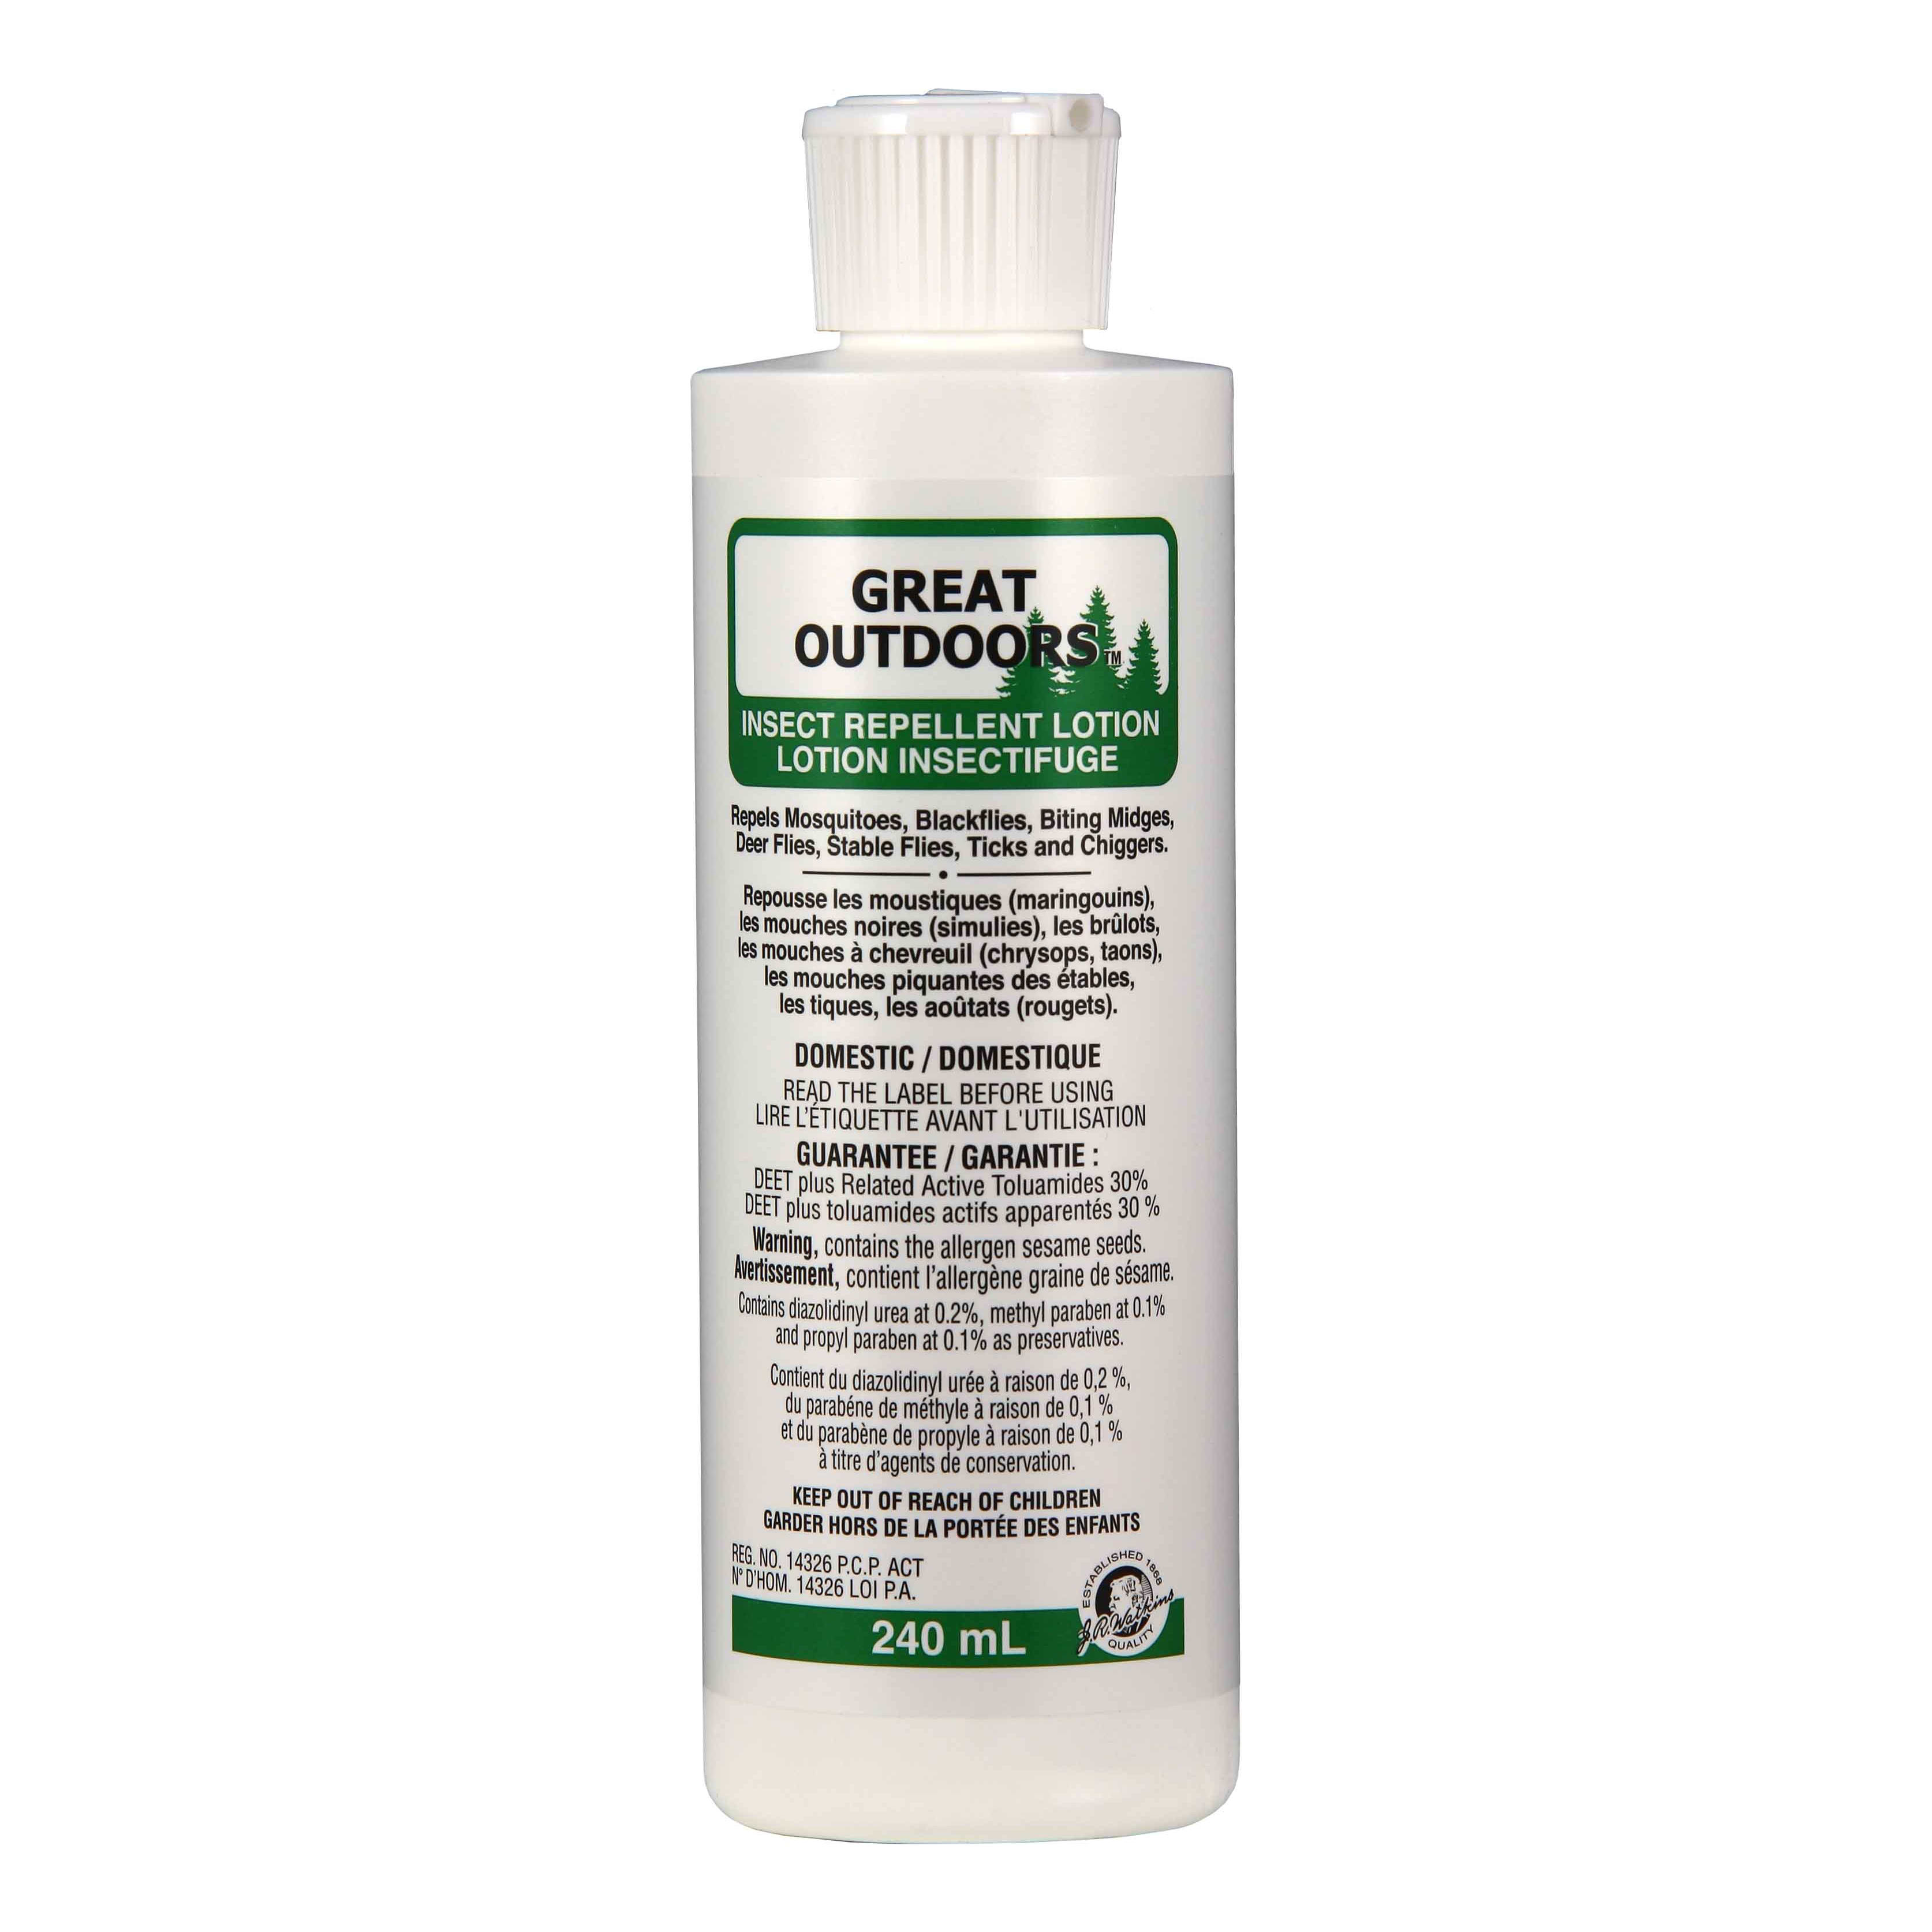 Great Outdoors Insect Repellent Lotion - 240 ml